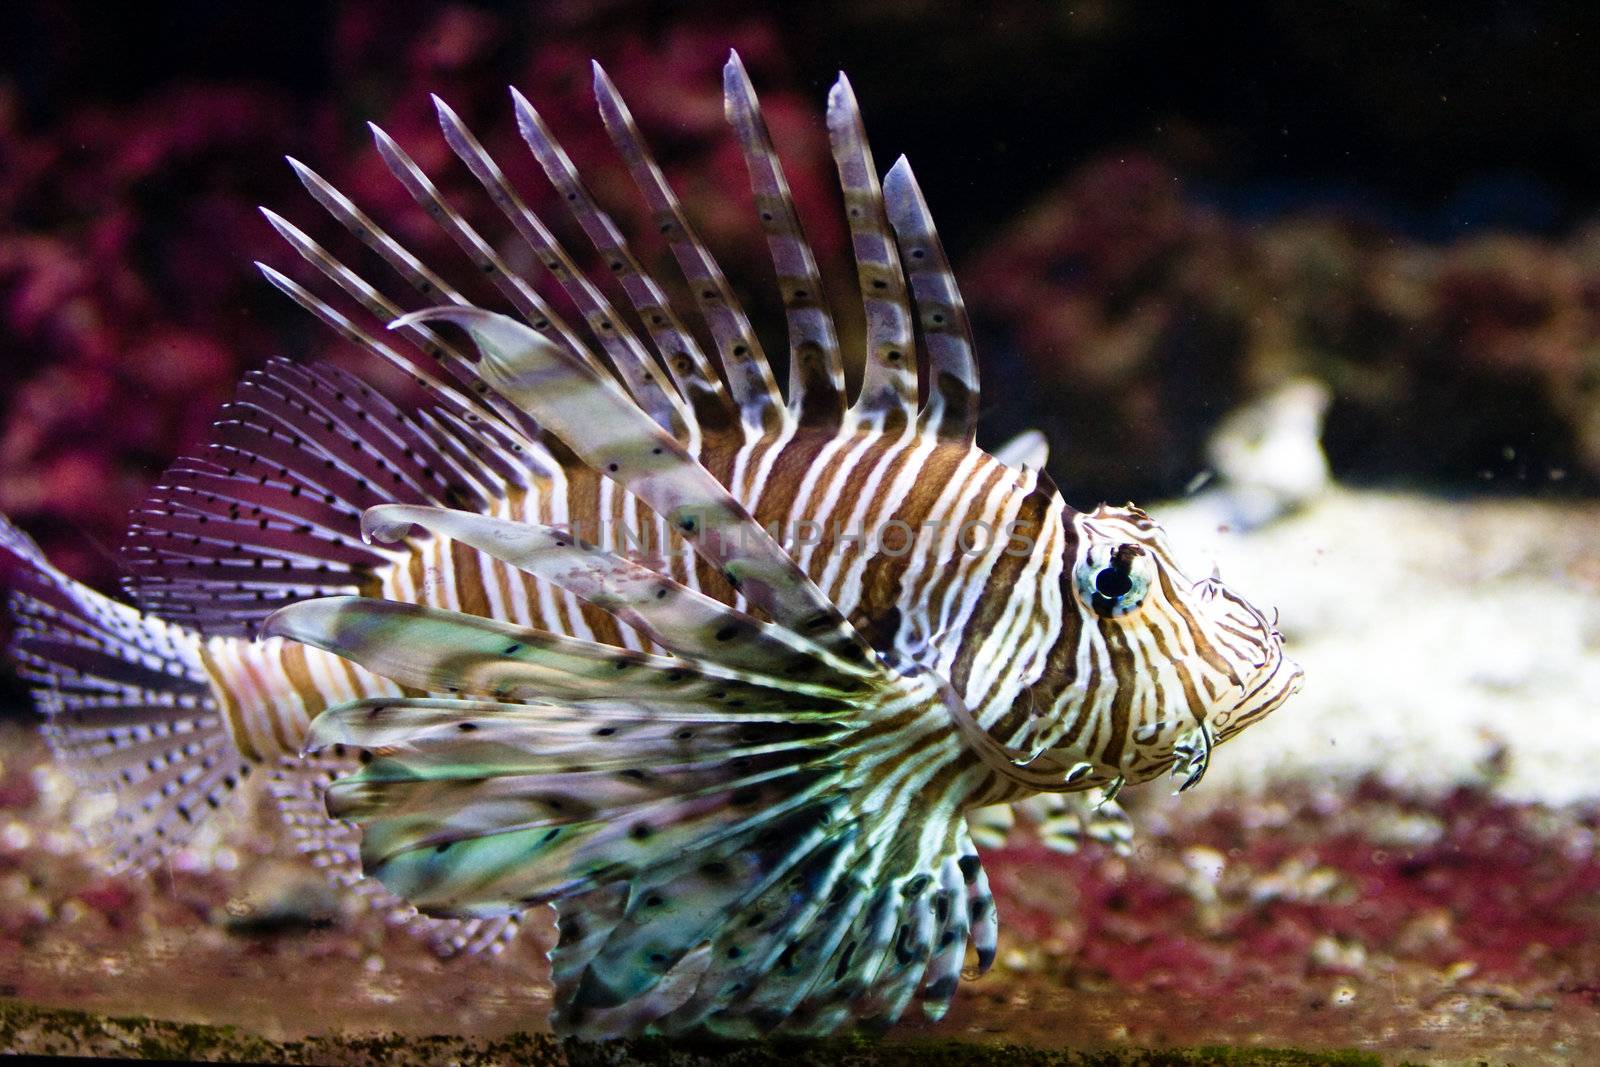 Giant Red LionFish, dangerous and poisonus